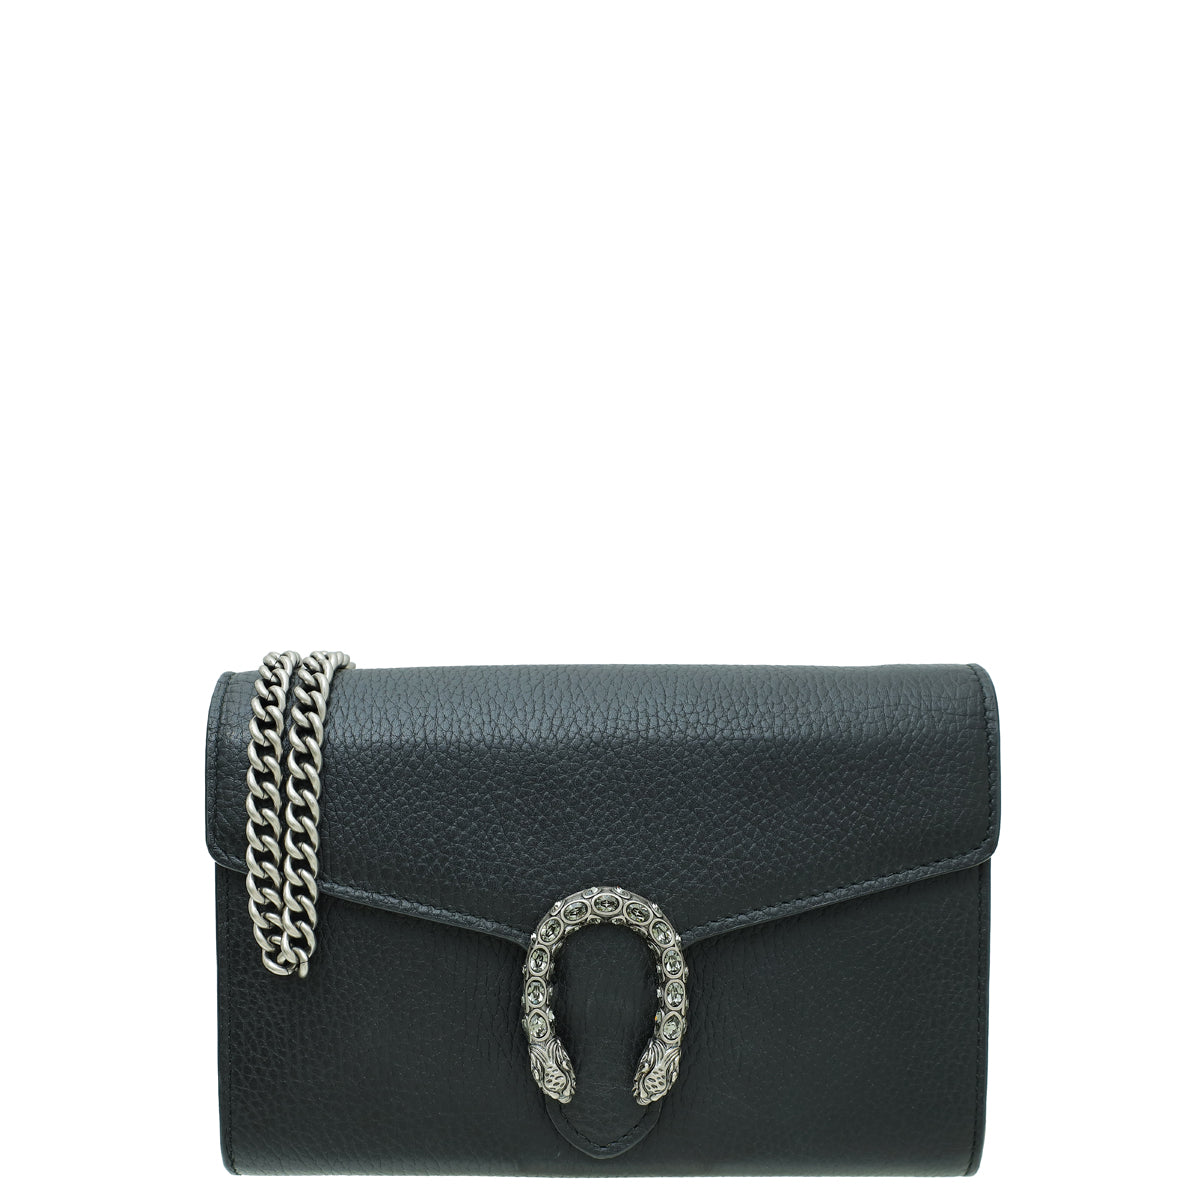 Load image into Gallery viewer, Gucci Black Dionysus Mini Chain Bag
